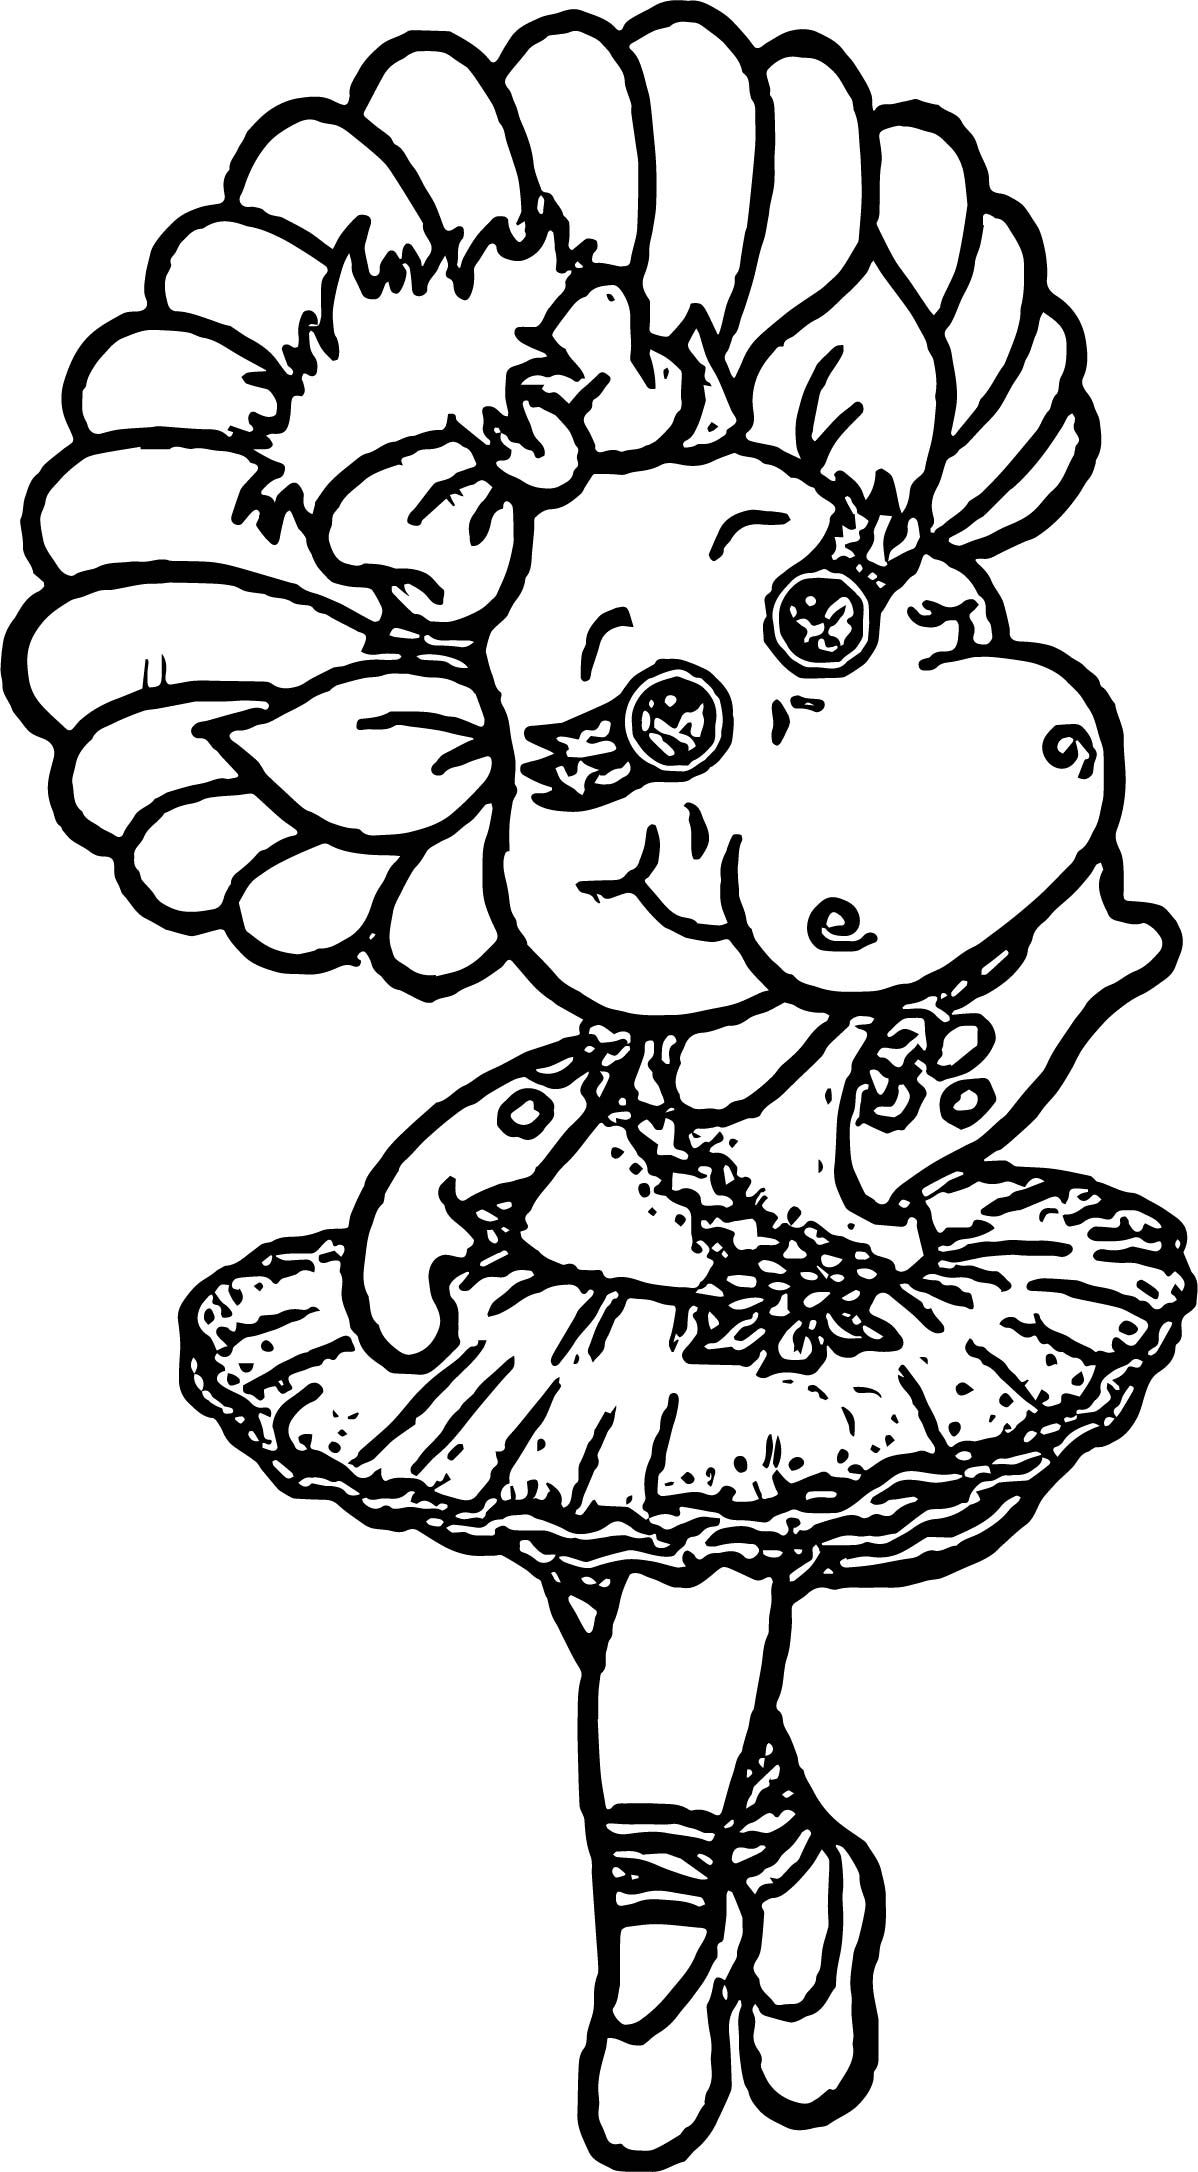 Baby Bop Dance Coloring Page | Dance coloring pages, Coloring ...